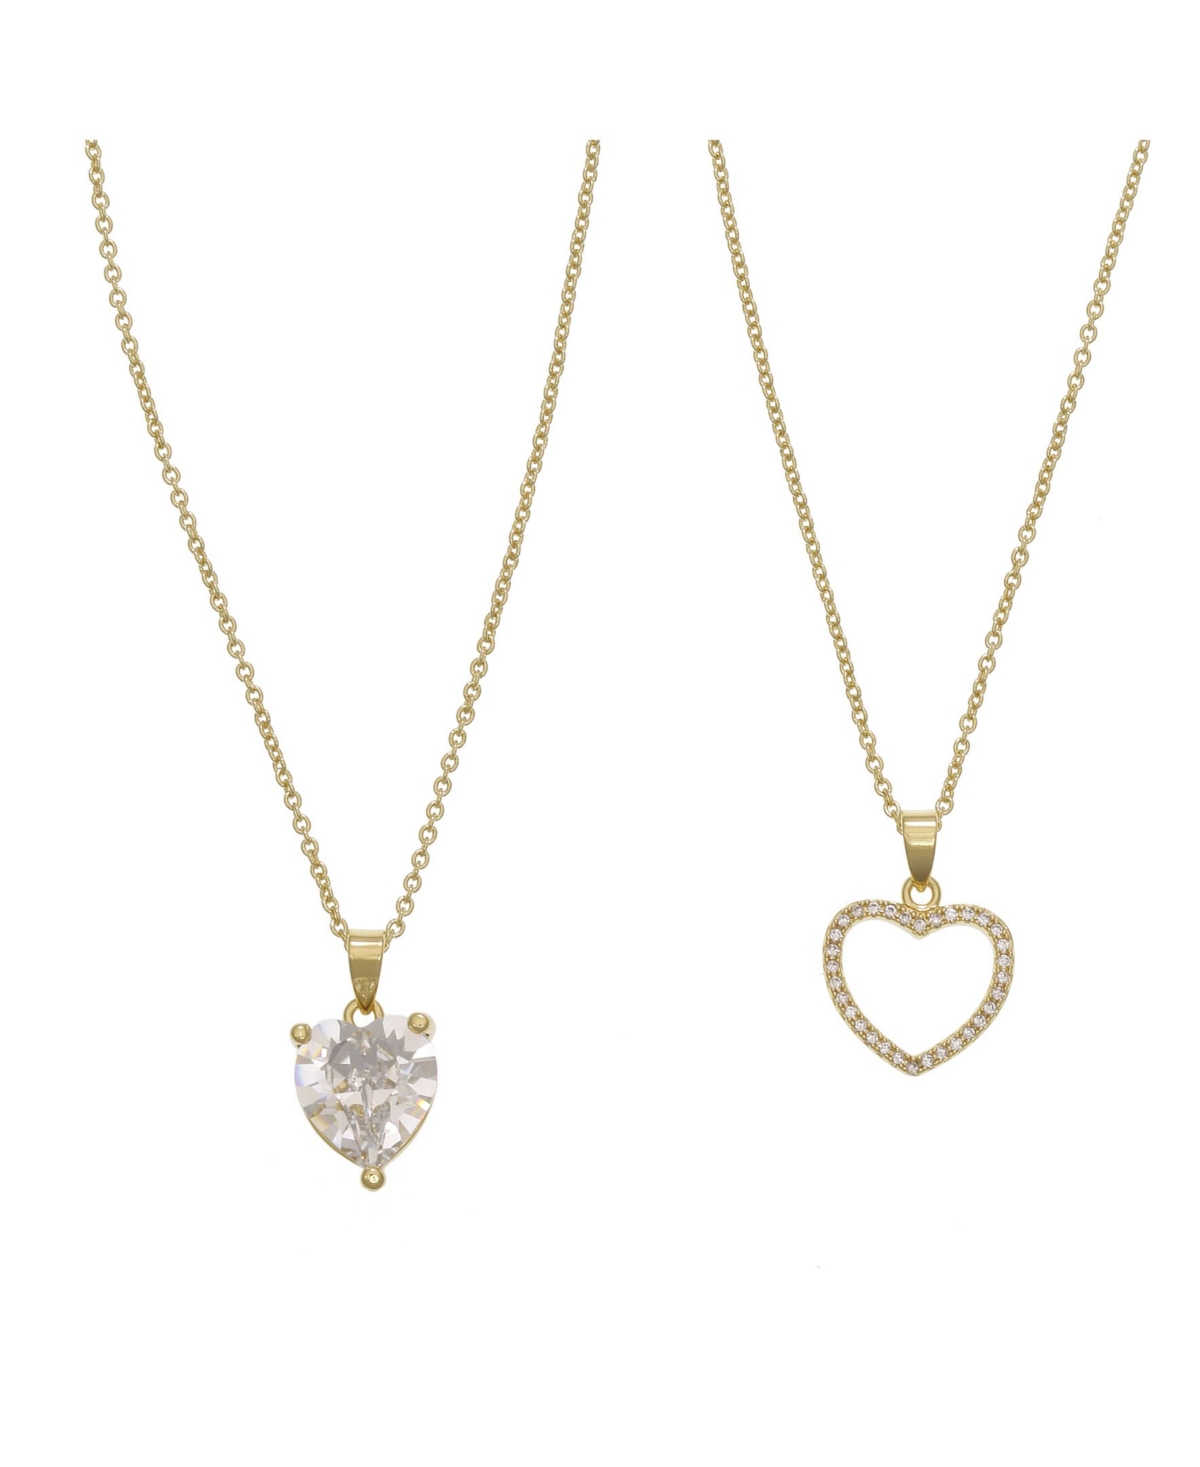 Women's Heart Pendant with Crystal Stones Necklace Set, 2 Piece - Gold-Tone